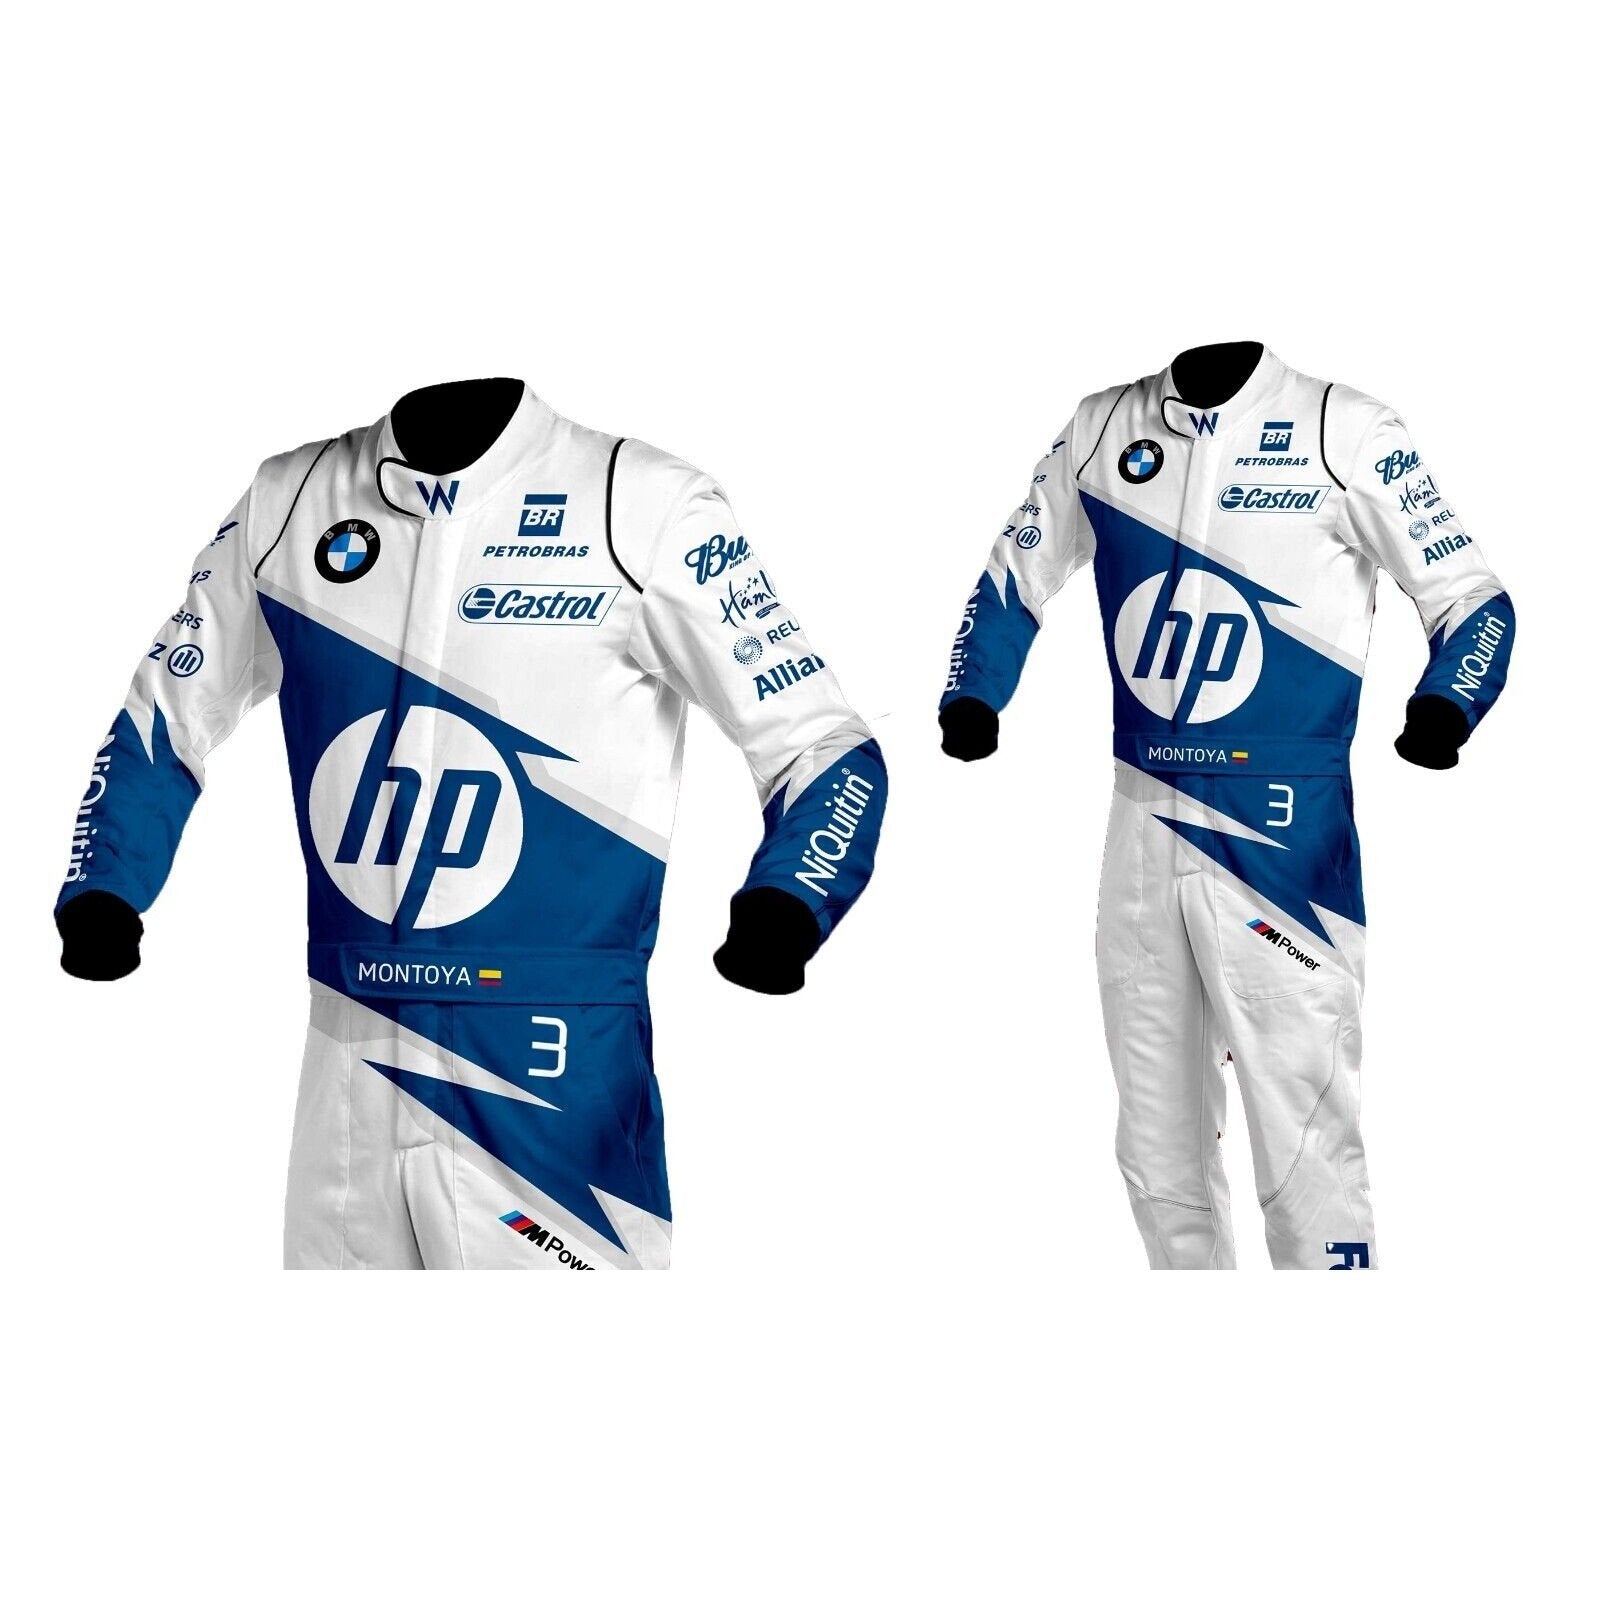 kart racing Sublimation Protective clothing Racing gear Suit N-0209